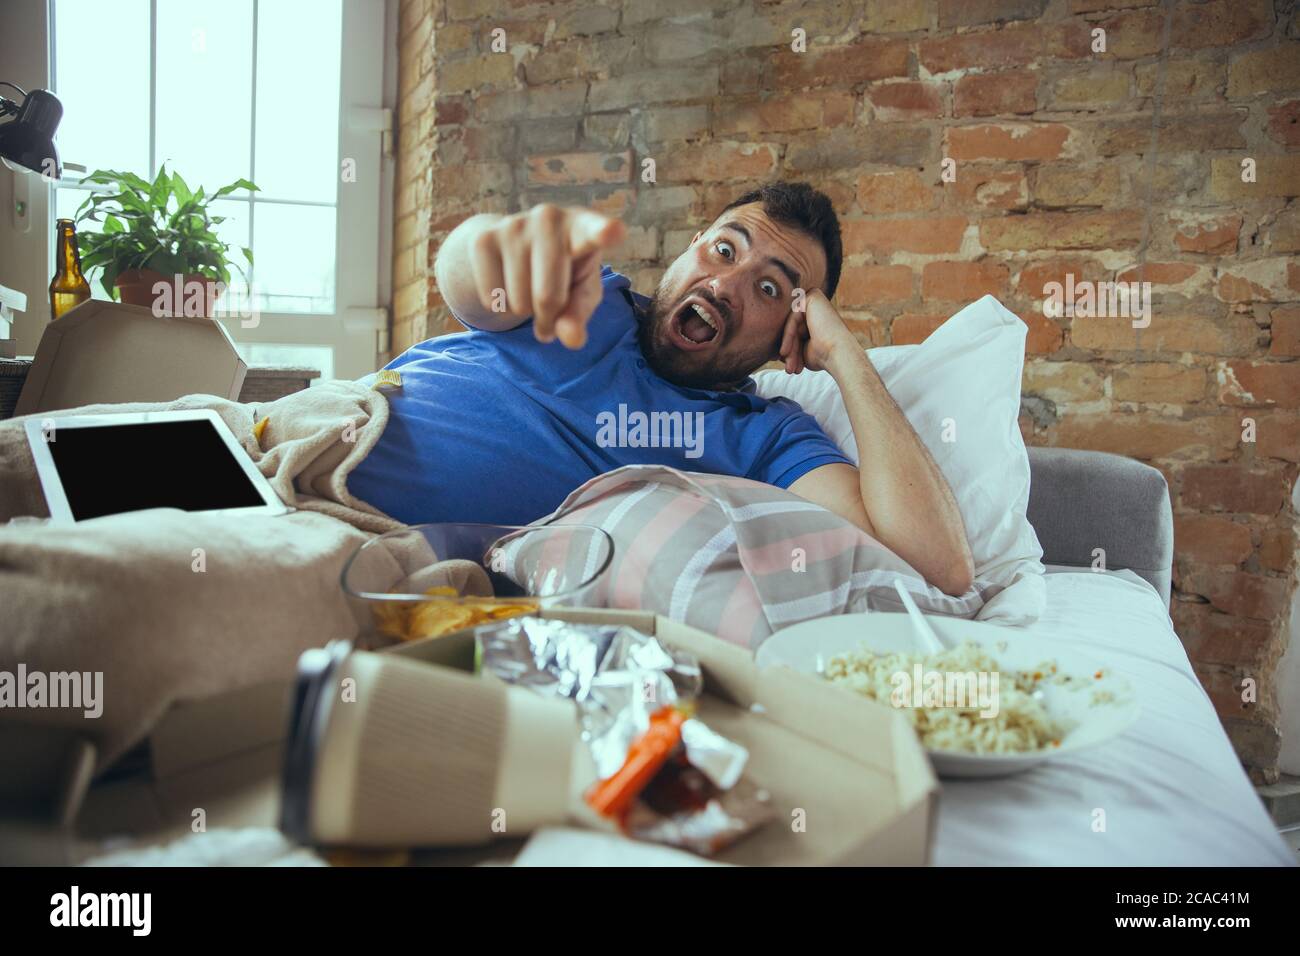 Pointing, laughting. Lazy caucasian man living in his bed surrounded with messy. No need to go out to be happy. Using gadgets, watching movie and series, social media, looks emotional. Home lifestyle. Stock Photo